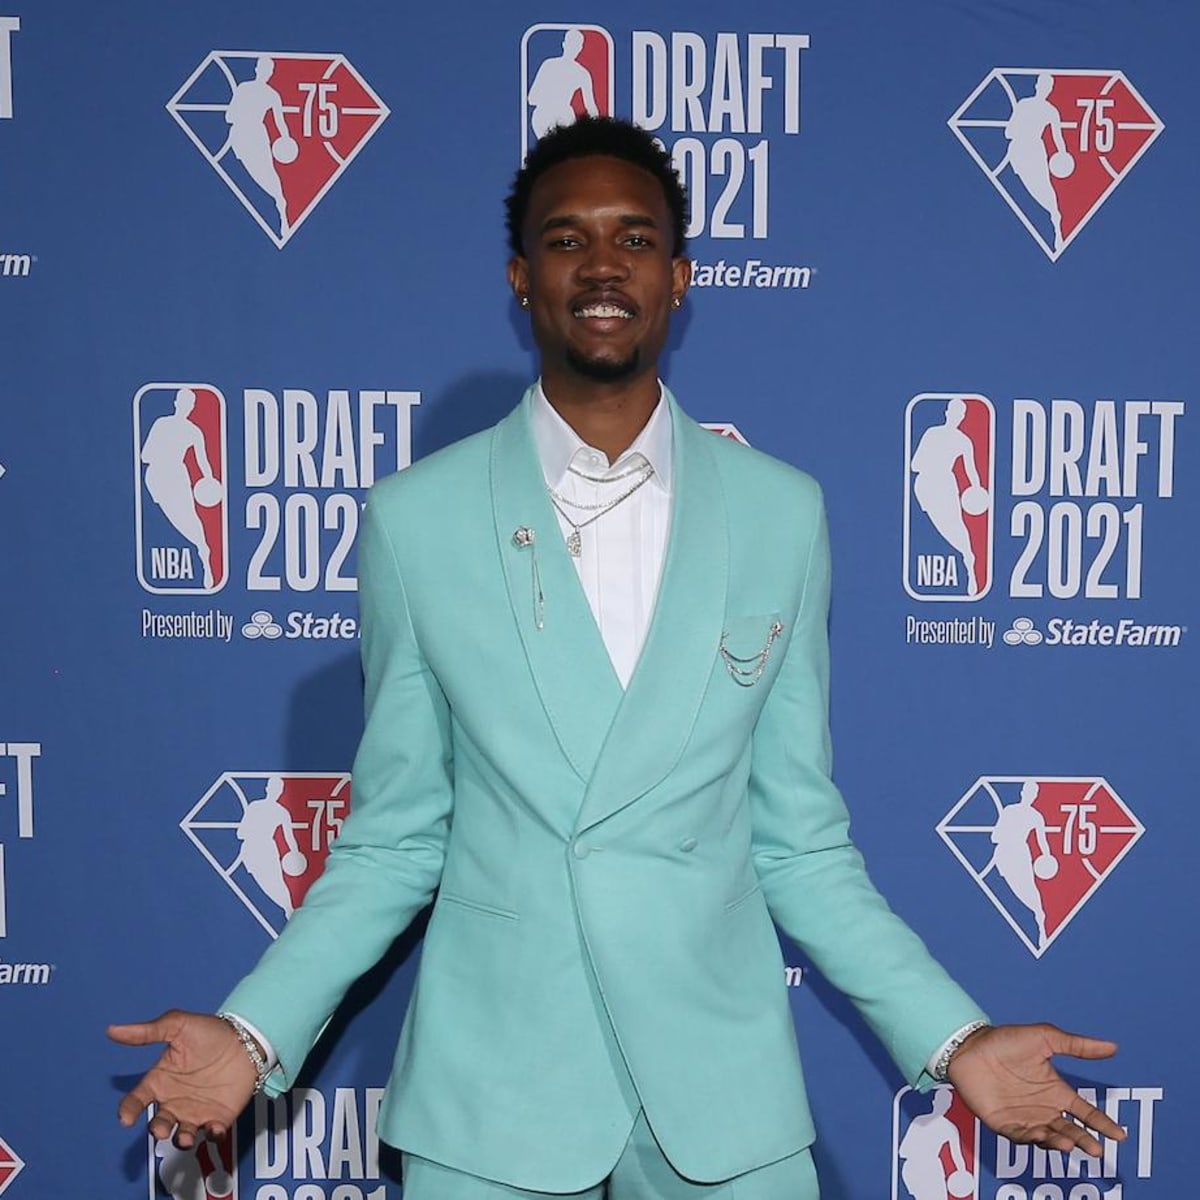 2021 NBA Draft live updates: Cavs draft USC's Evan Mobley with 3rd